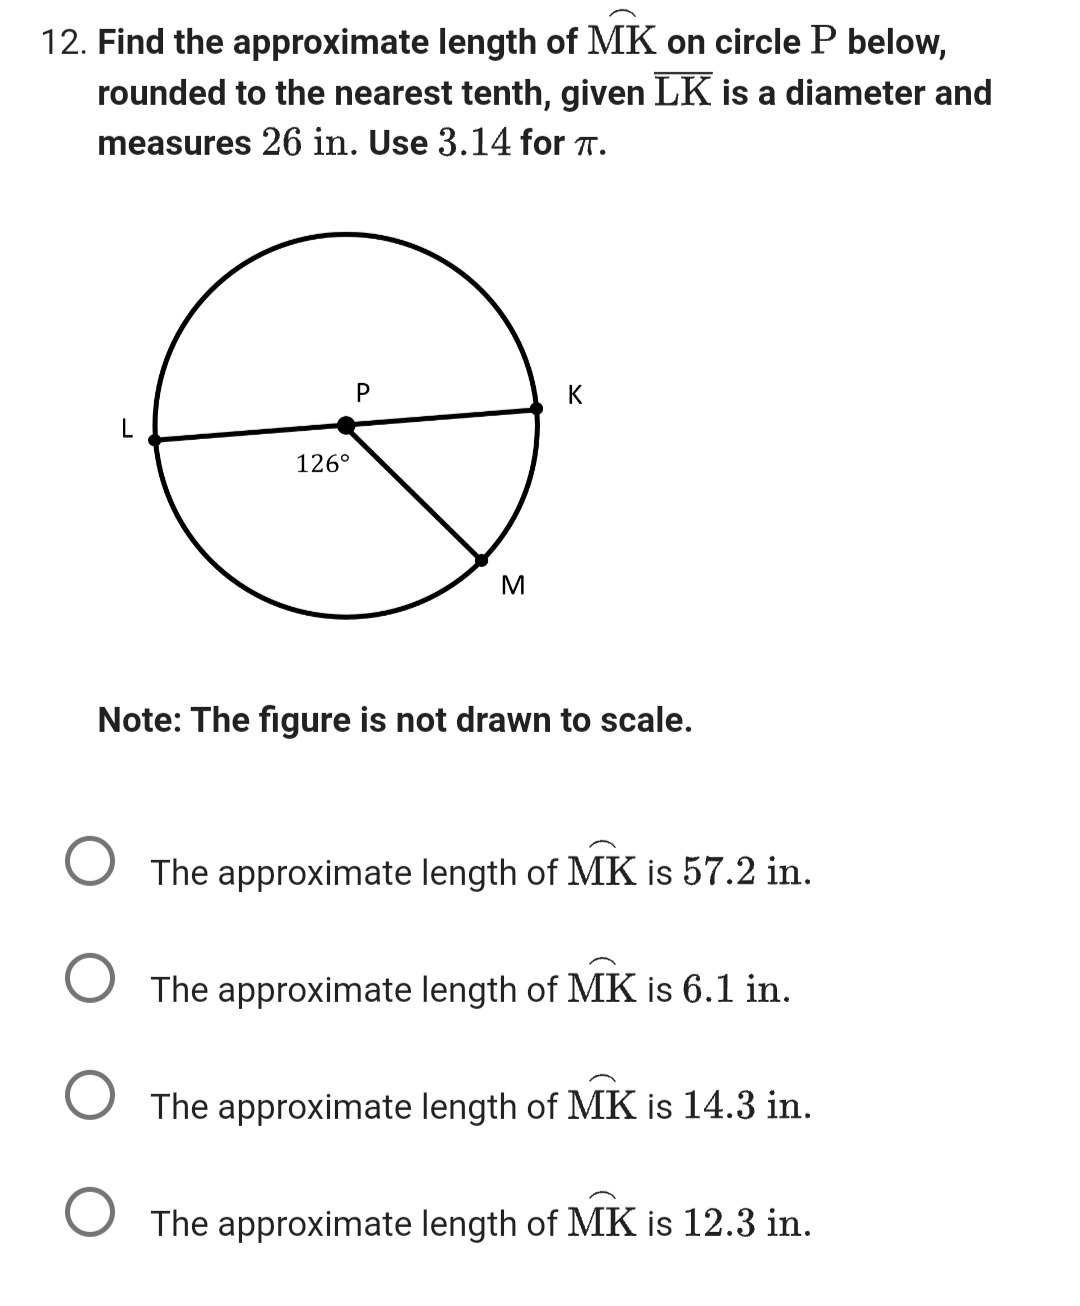 12. Find the approximate length of MK on circle P below,
rounded to the nearest tenth, given LK is a diameter and
measures 26 in. Use 3.14 for TT.
126⁰
P
M
K
Note: The figure is not drawn to scale.
The approximate length of MK is 57.2 in.
The approximate length of MK is 6.1 in.
The approximate length of MK is 14.3 in.
O The approximate length of MK is 12.3 in.